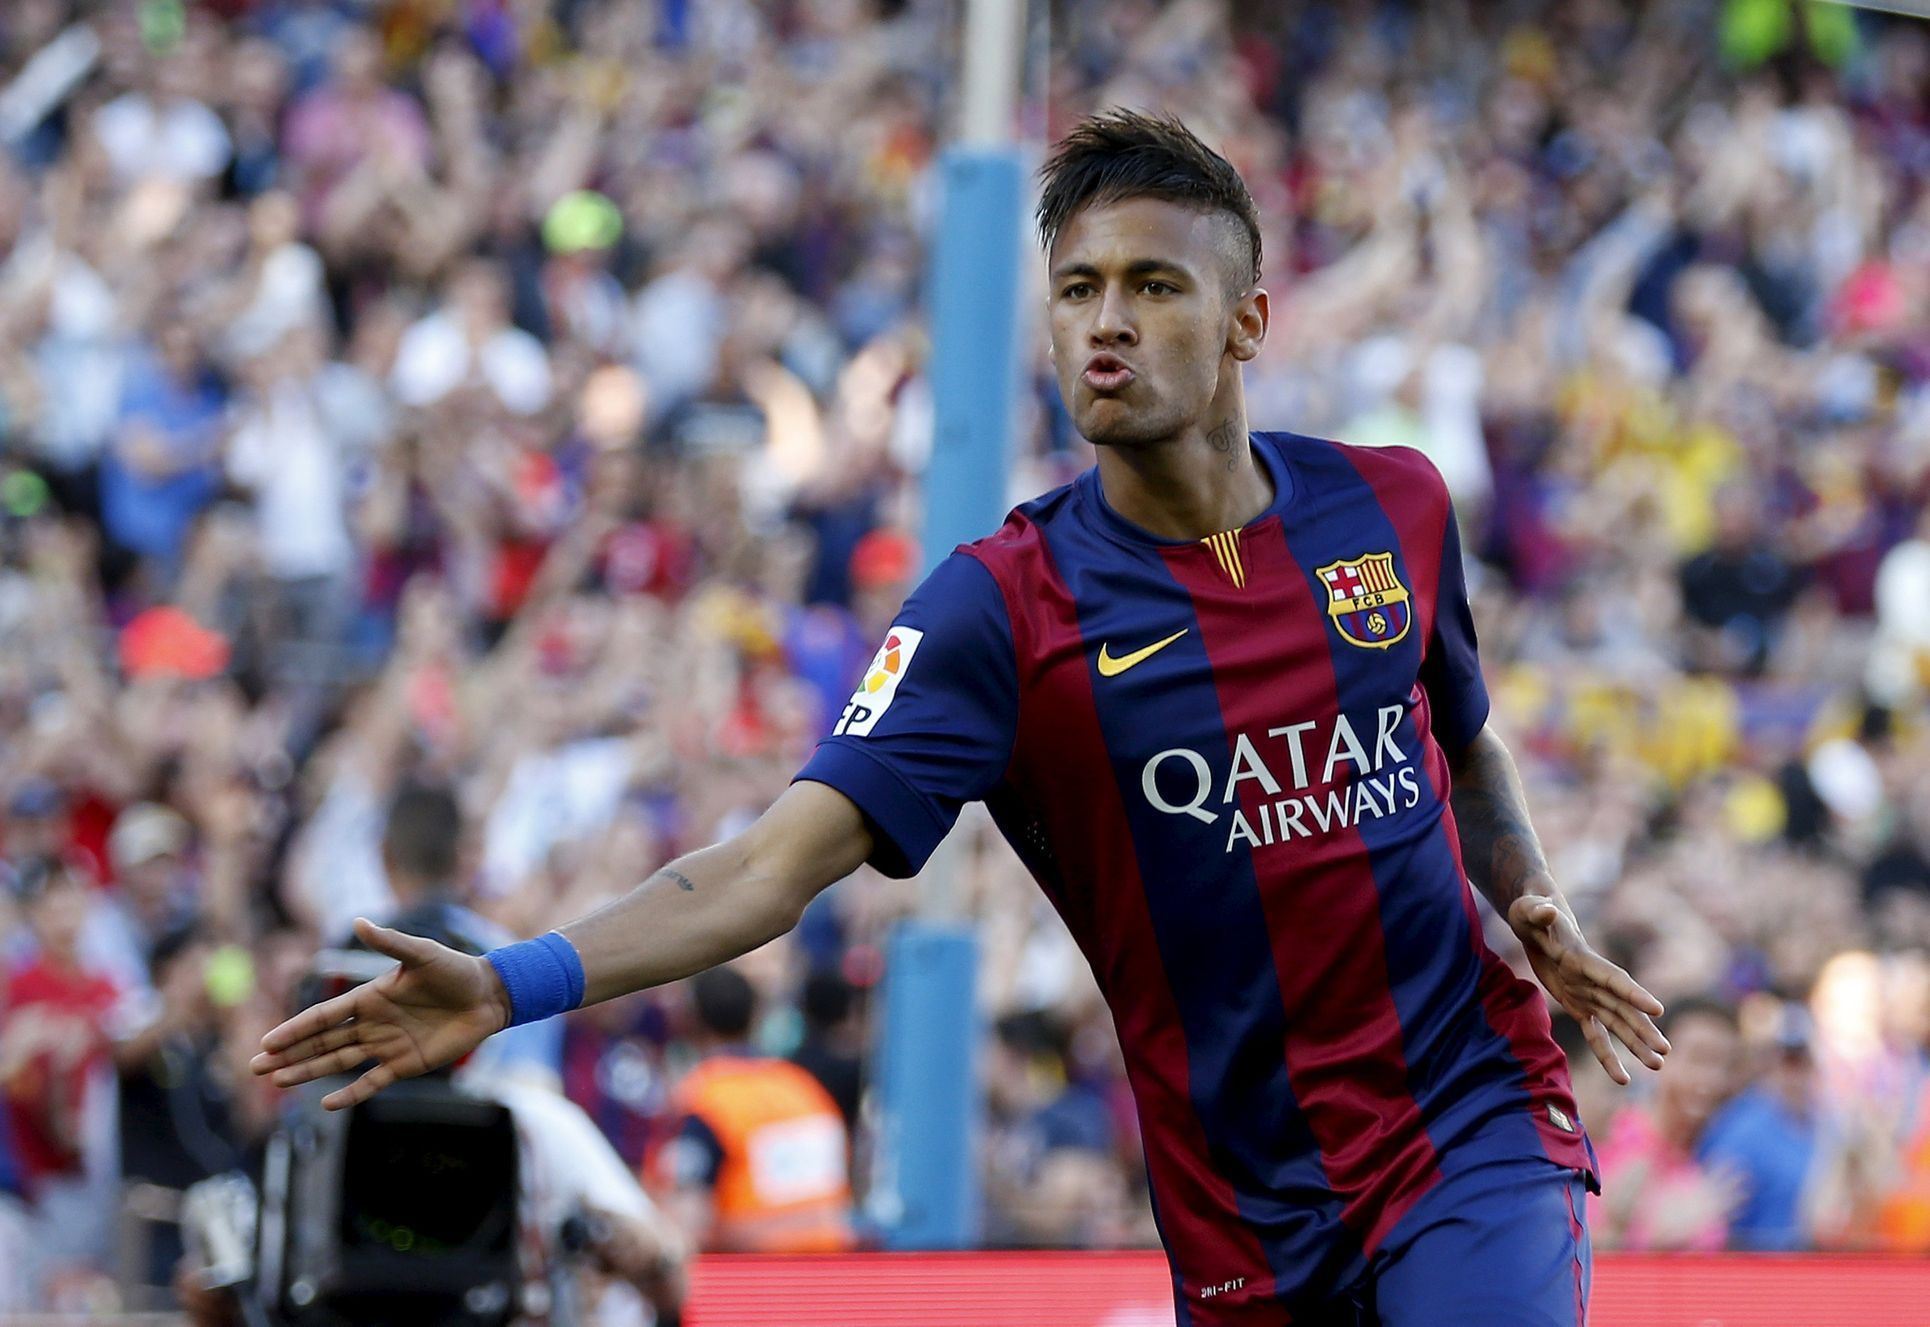 Barcelona's Neymar celebrates his goal against Real Sociedad during their Spanish first division soccer matchat Nou Camp stadium in Barcelona